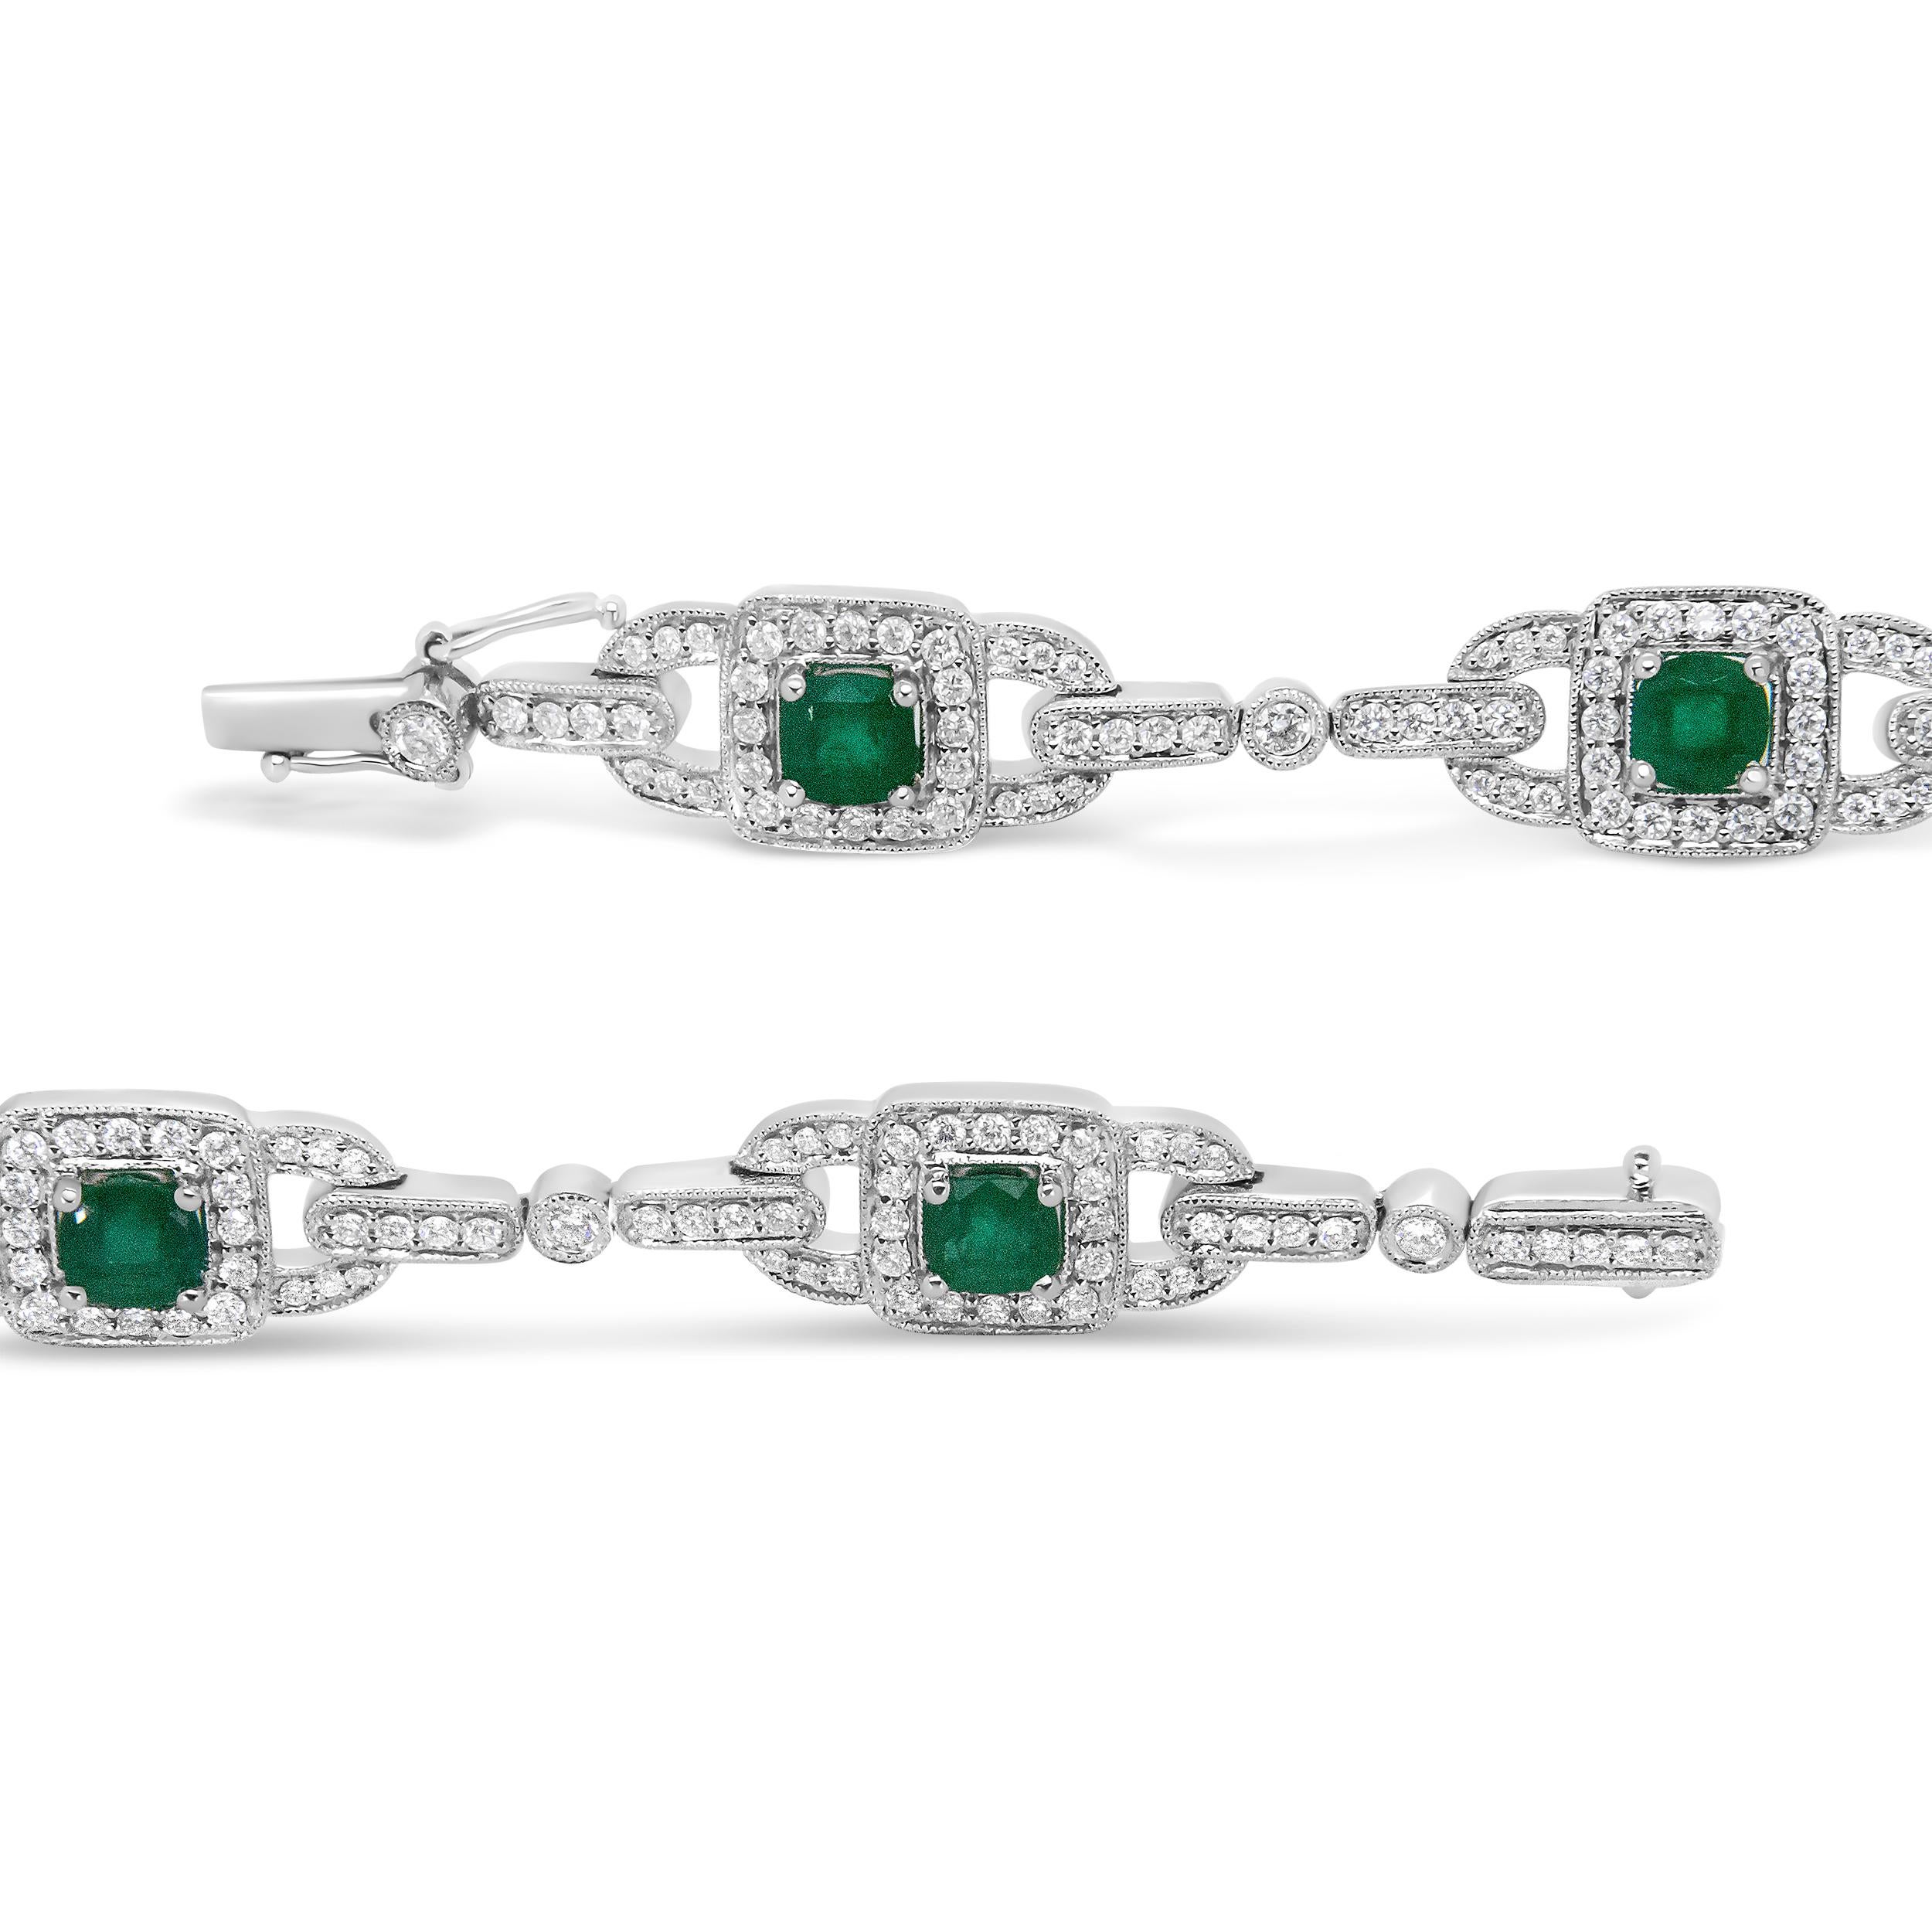 This shimmering women's link bracelet features diamond-encrusted links of 14k white gold alongside faceted 5mm cushion cut emeralds. Each prong-set emerald gemstone is haloed by round, prong-set diamonds in a sophisticate pattern linked by single